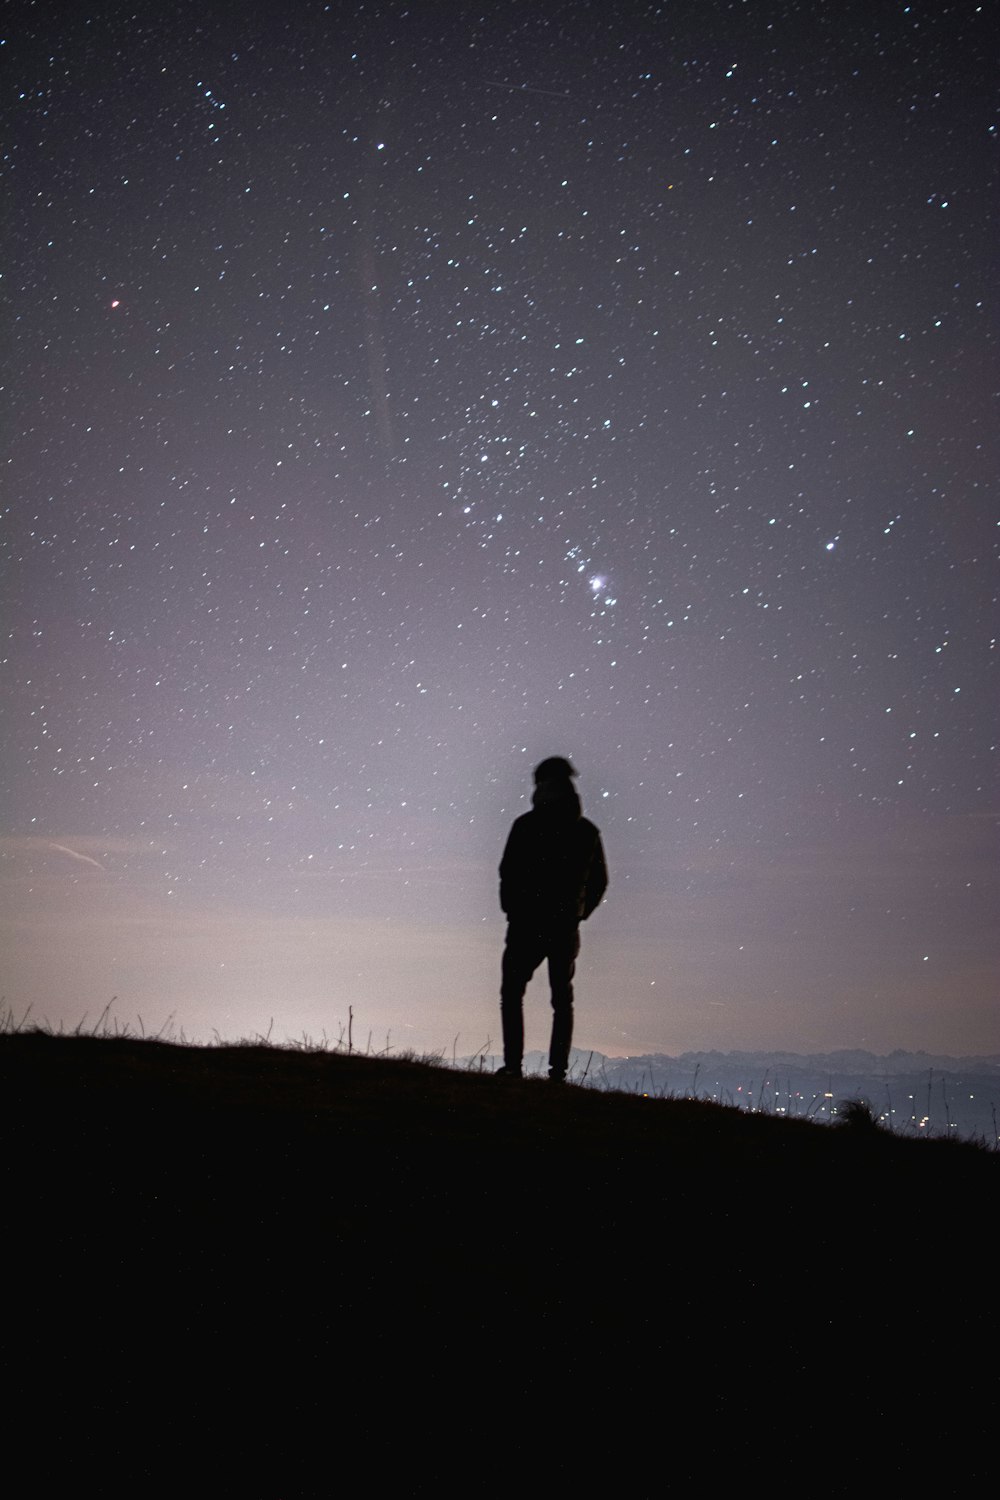 a person standing on a hill looking at the stars in the sky